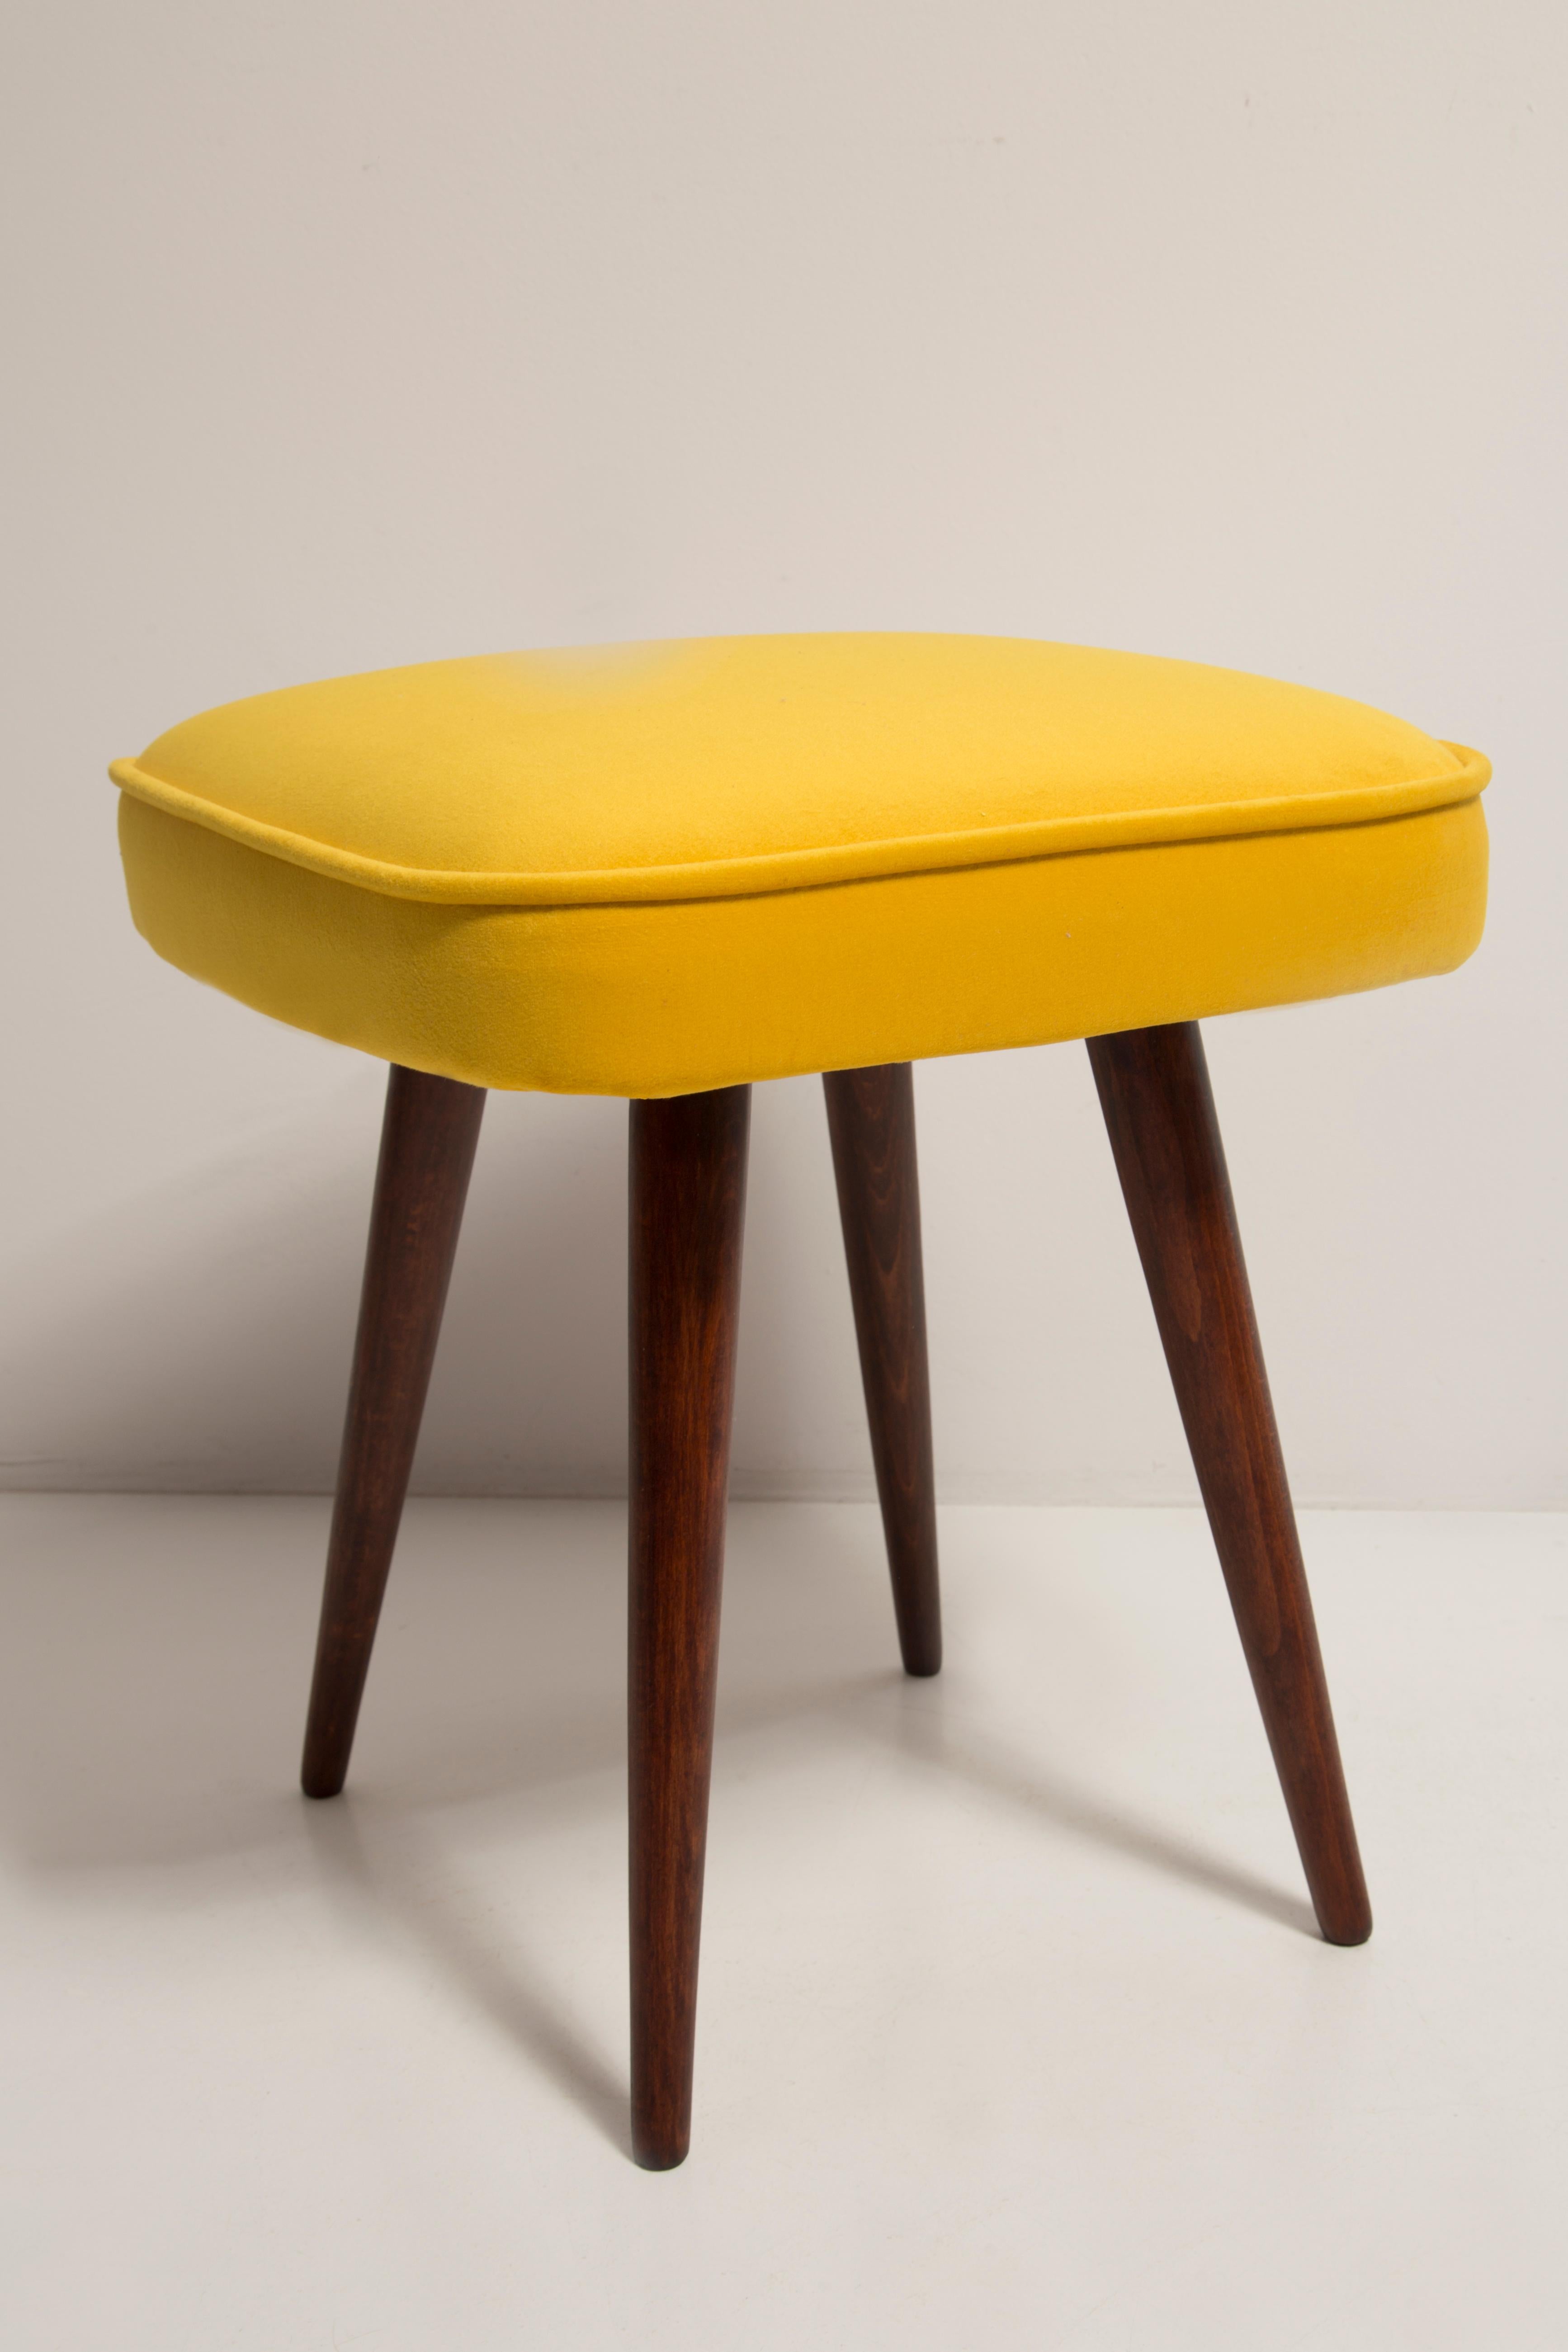 Set of Two Mid-Century Yellow Velvet Foot Stools, Europe, 1960s For Sale 4